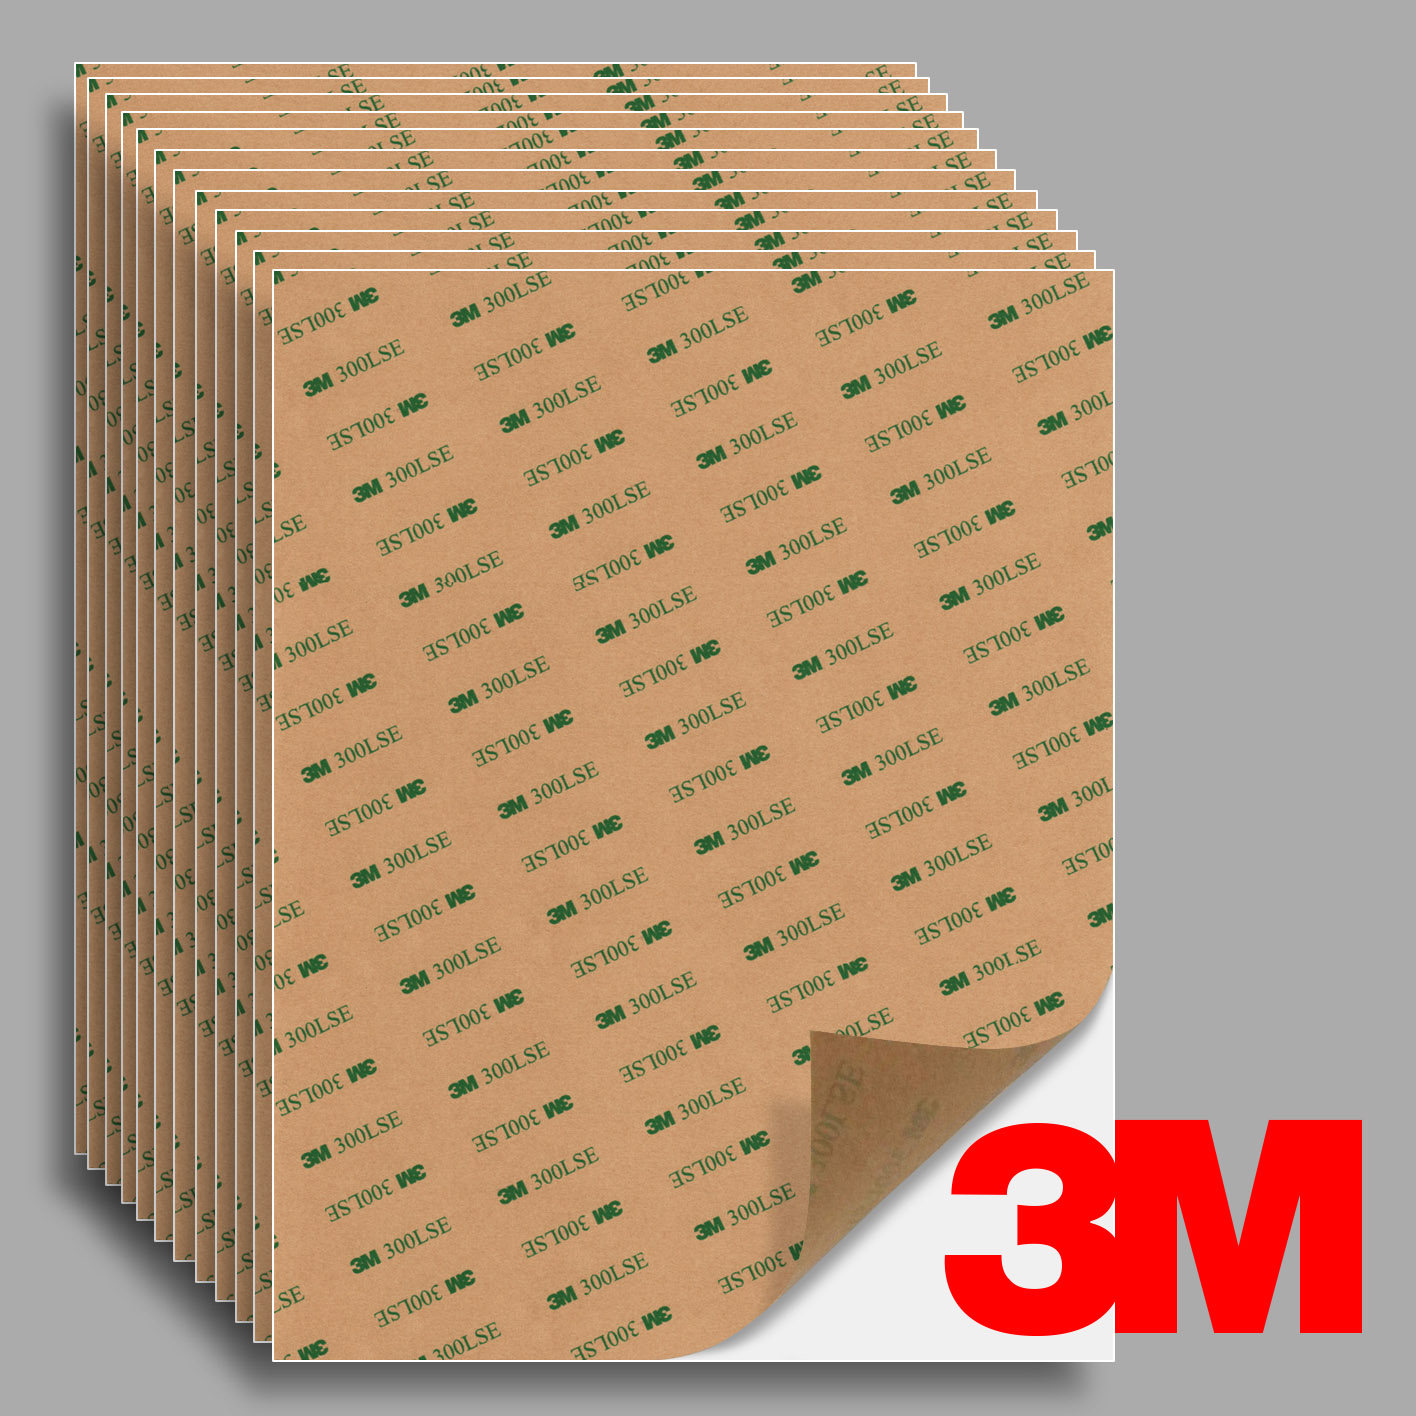 3M 300LSE Double Sided SUPER STICKY HEAVY DUTY ADHESIVE SHEET 4x8  100MM*200MM